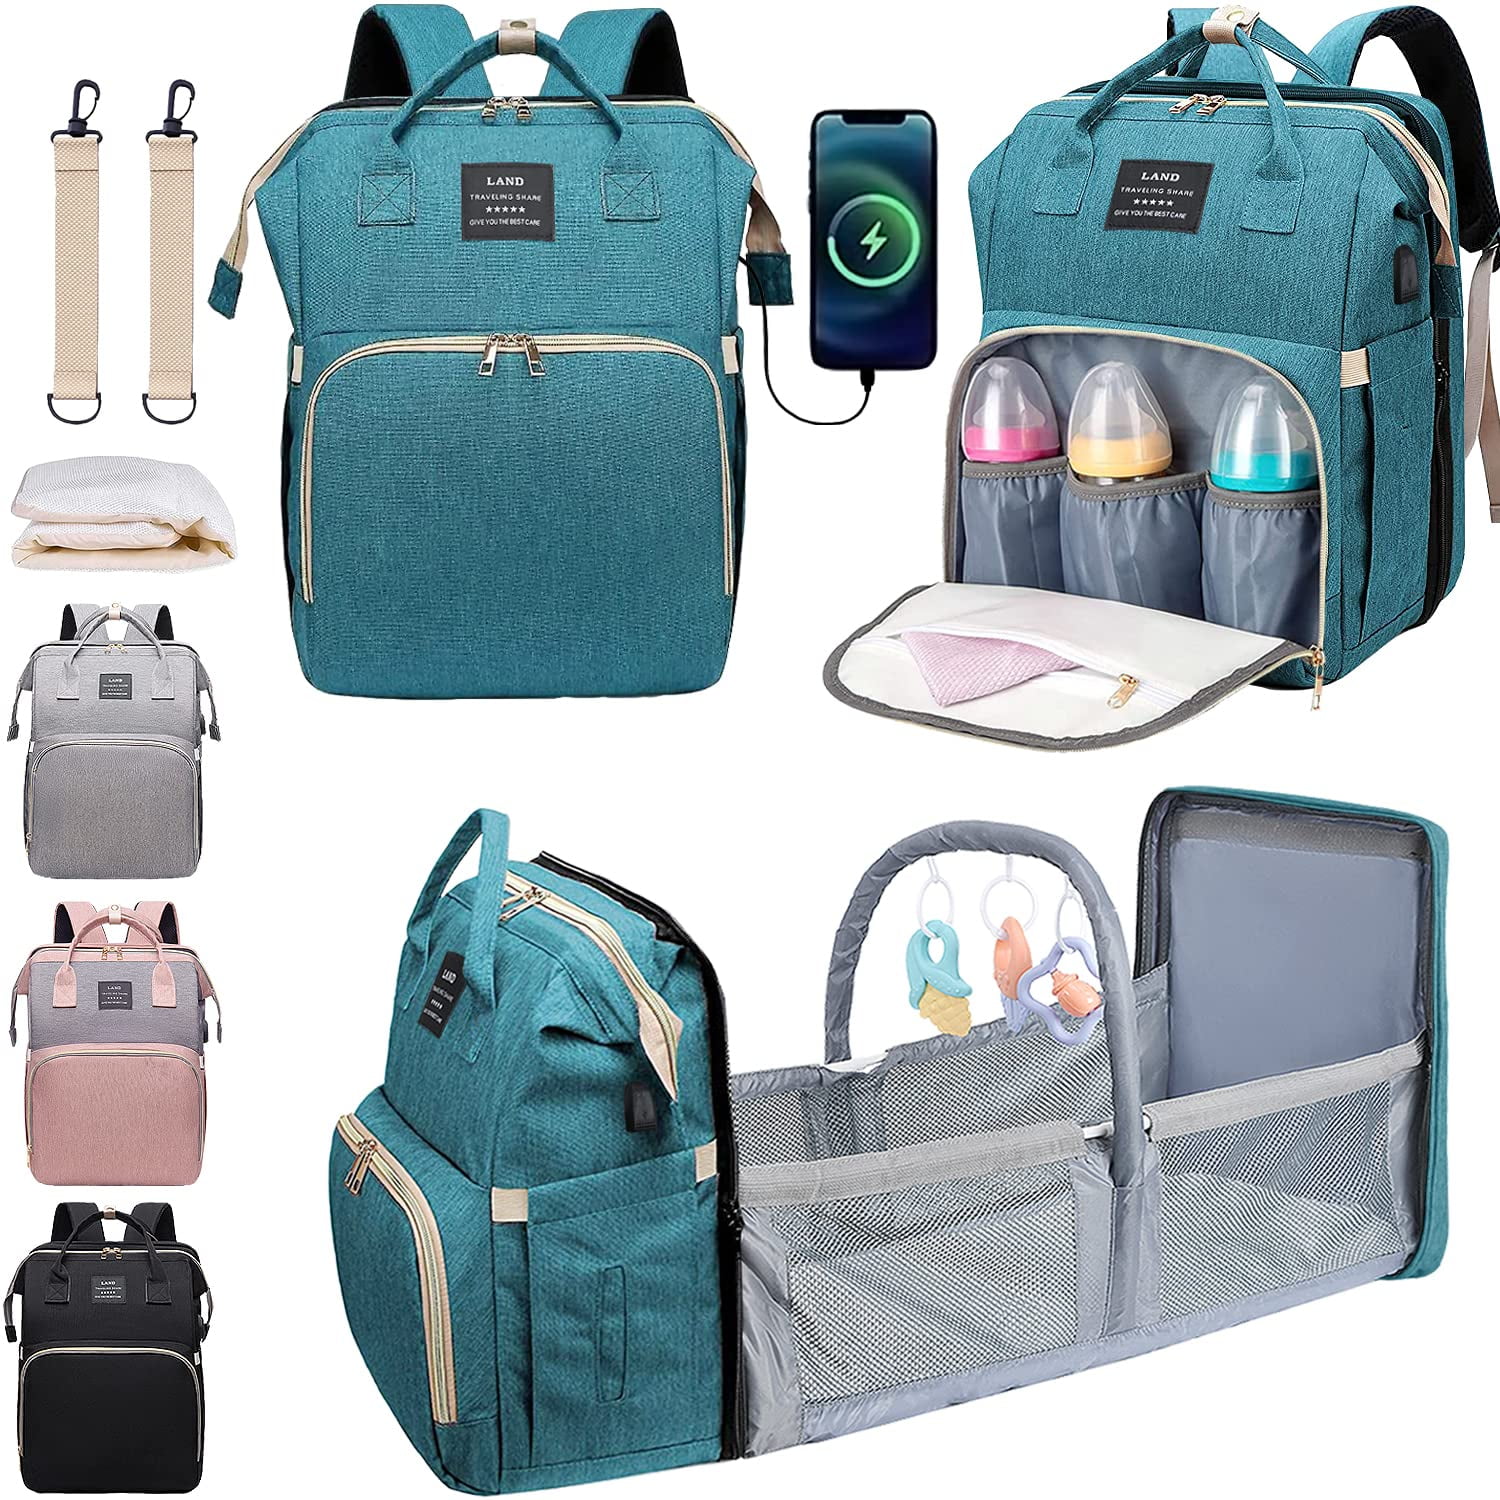 Camp With Pro Waterproof Changing Station Backpack Diaper Bag, Solid Print  - Walmart.com